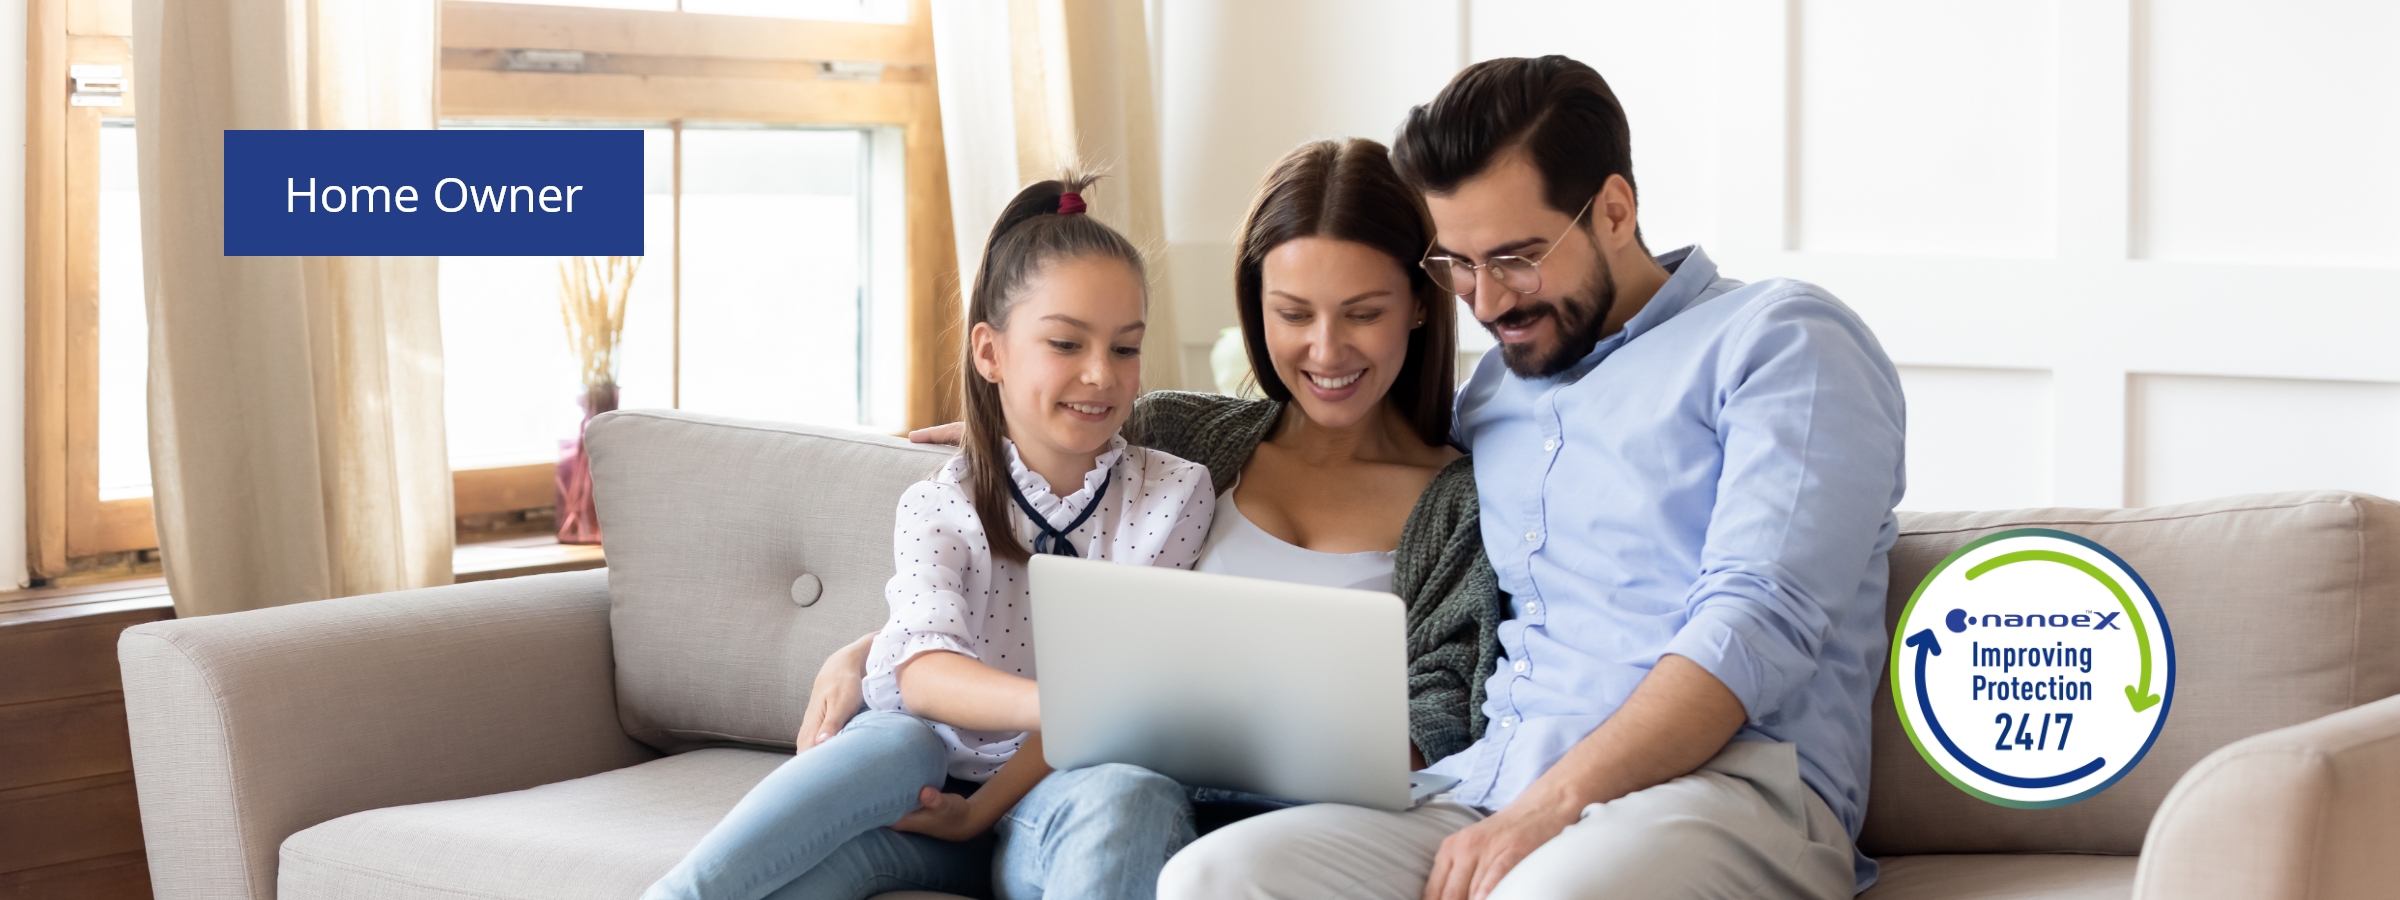 An image of a daughter and her parents sitting on a sofa while looking into a PC.